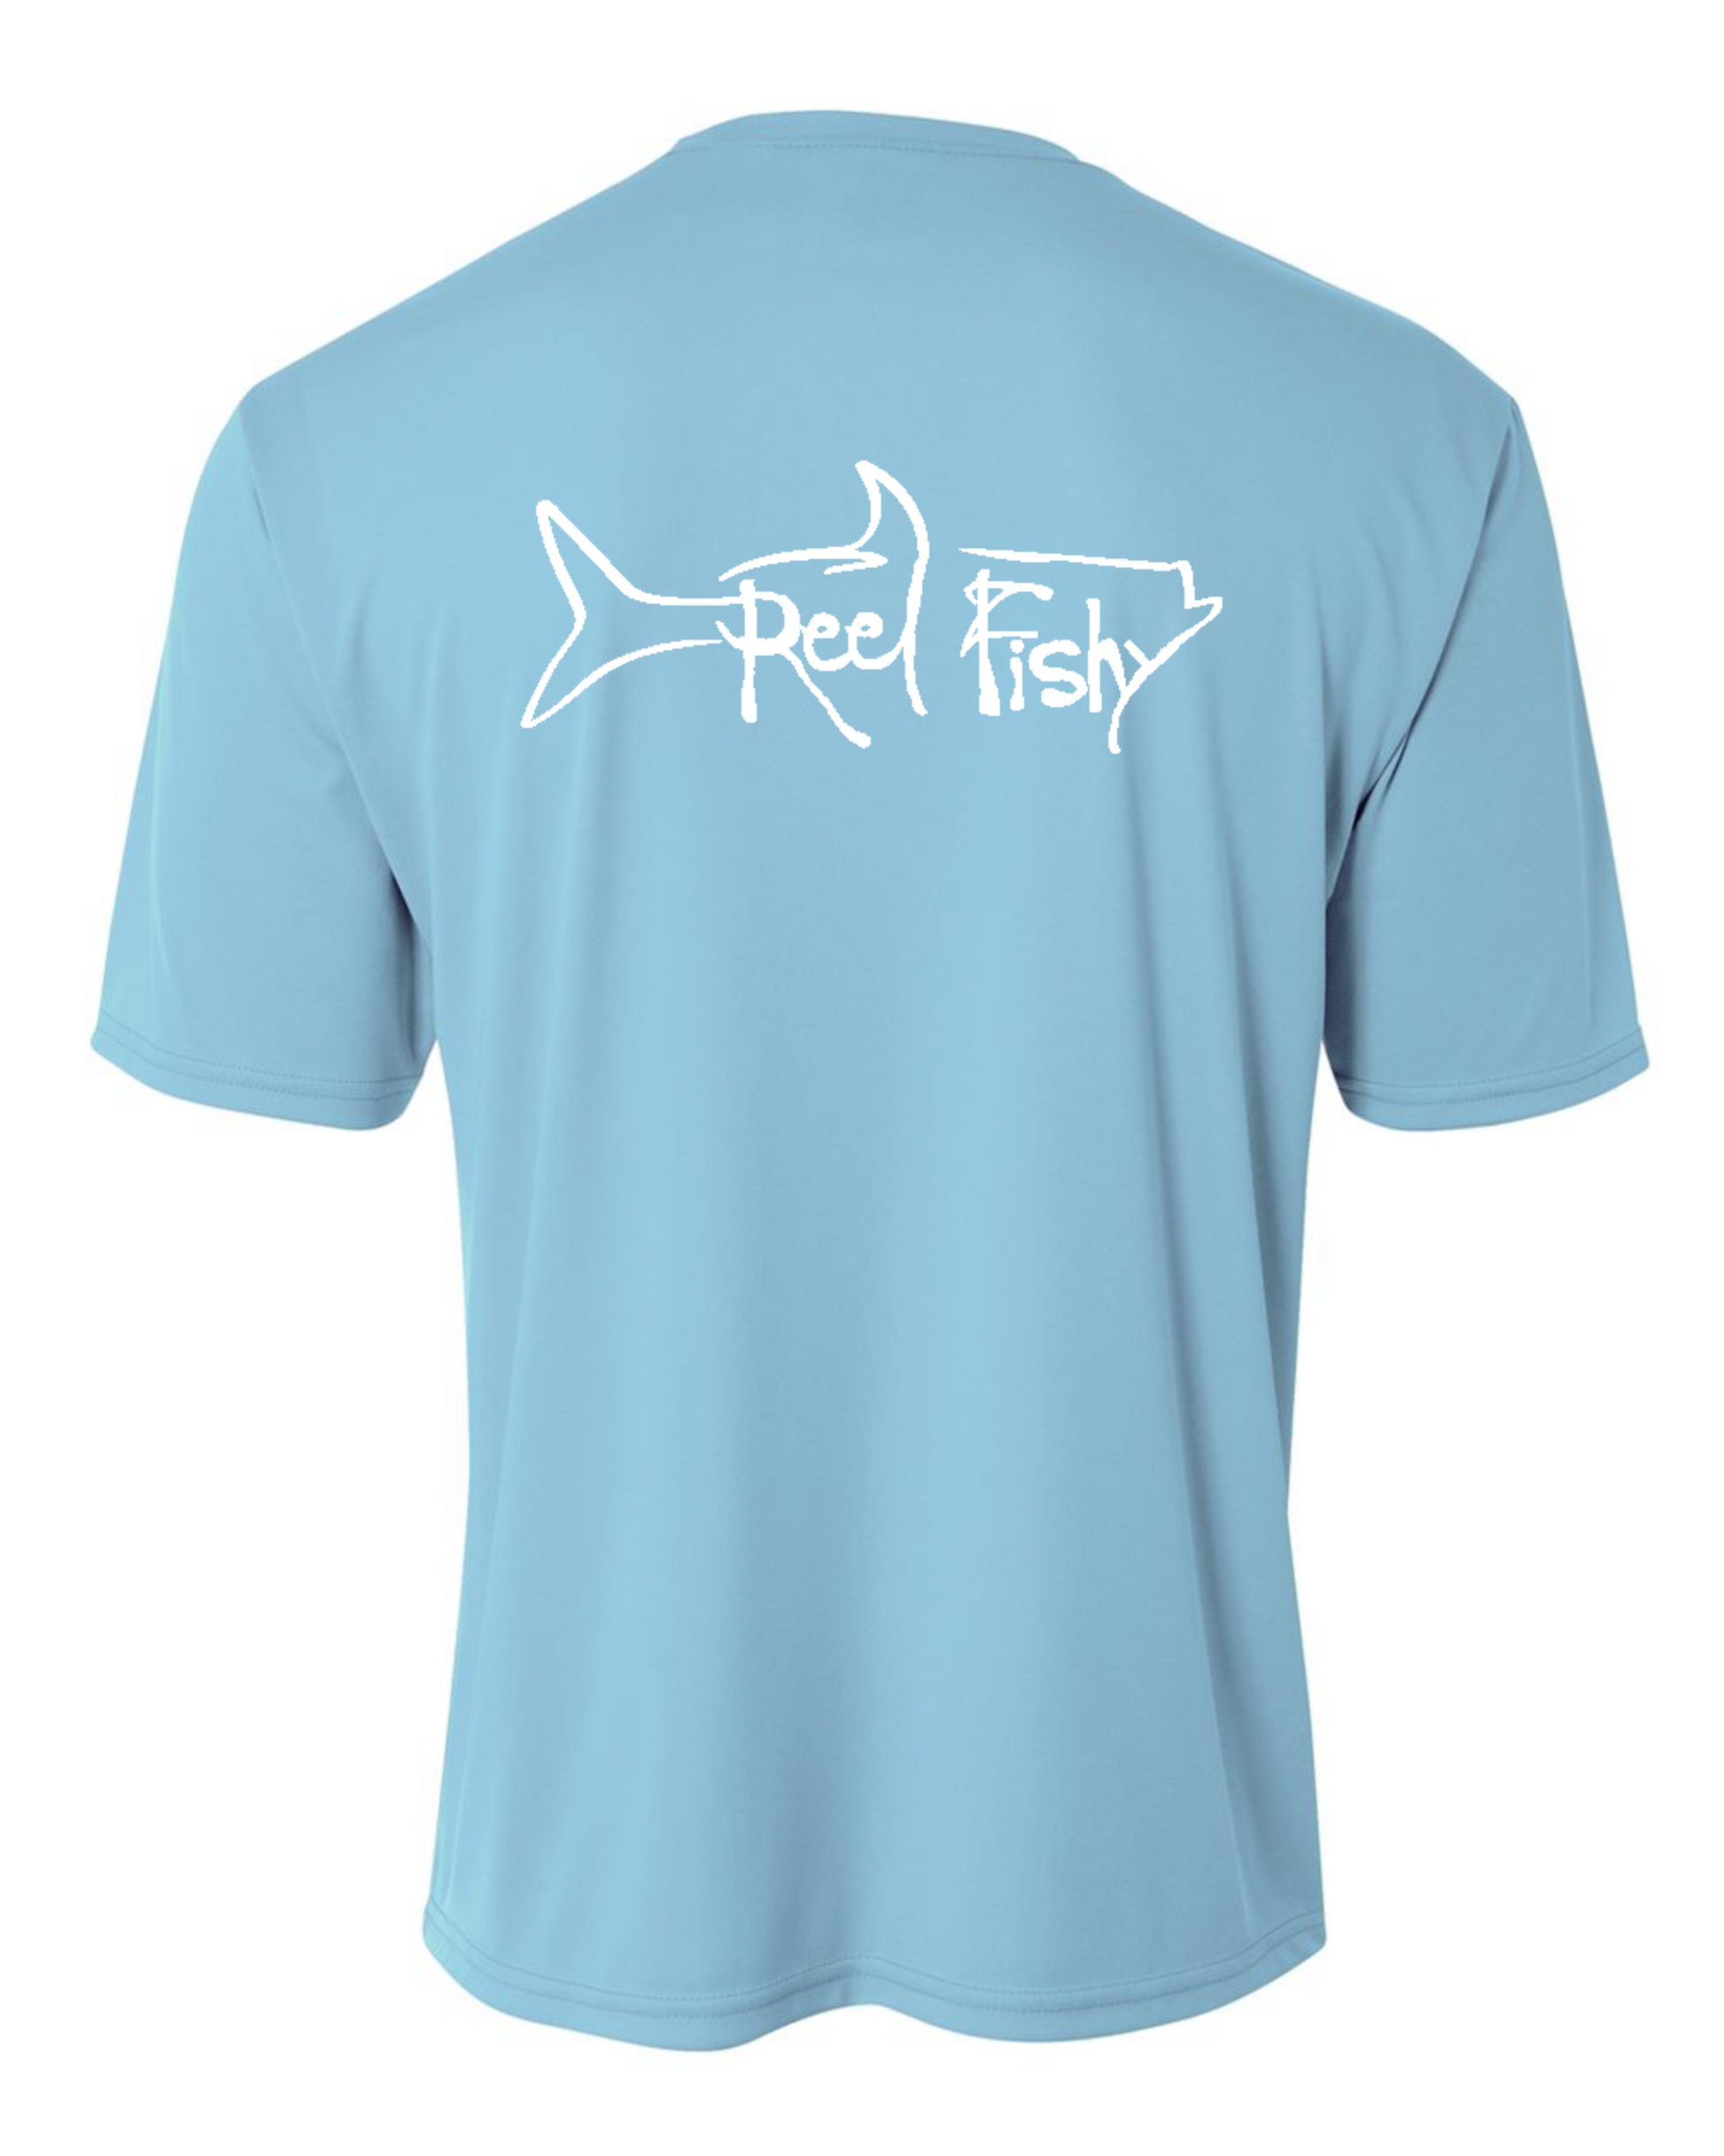 Youth Performance Dry-Fit Tarpon Fishing Shirts 50+Upf Sun Protection - Reel Fishy Apparel L / Pink S/S